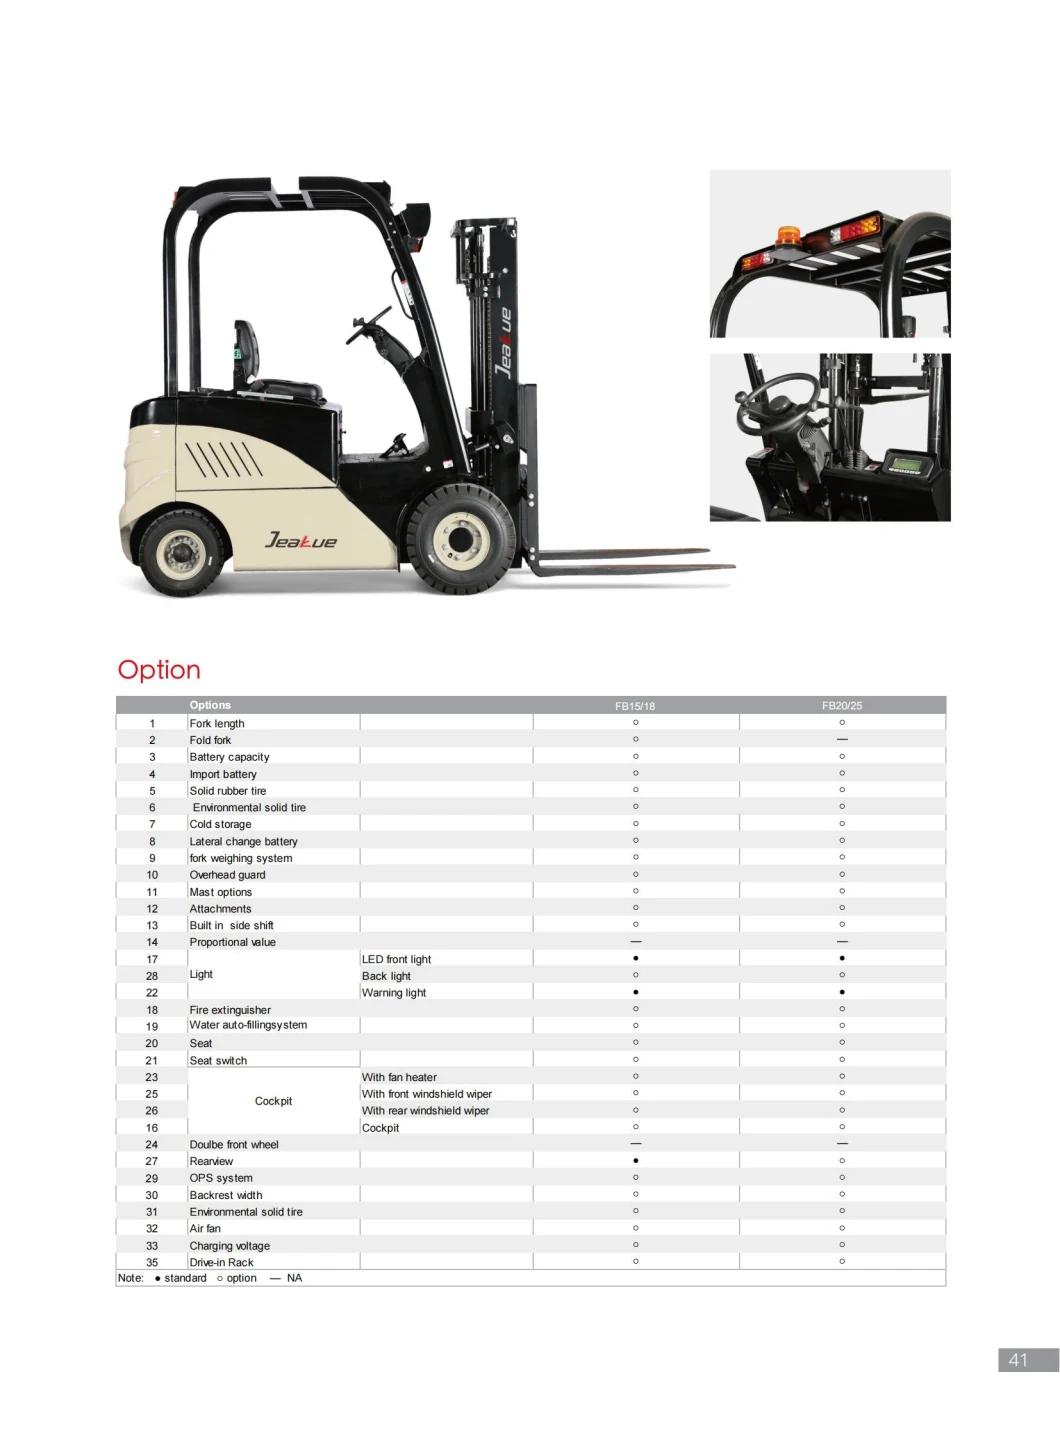 Heavy Duty Full AC Motor Electric Truck Forklift CE with Lithium Battery Operated